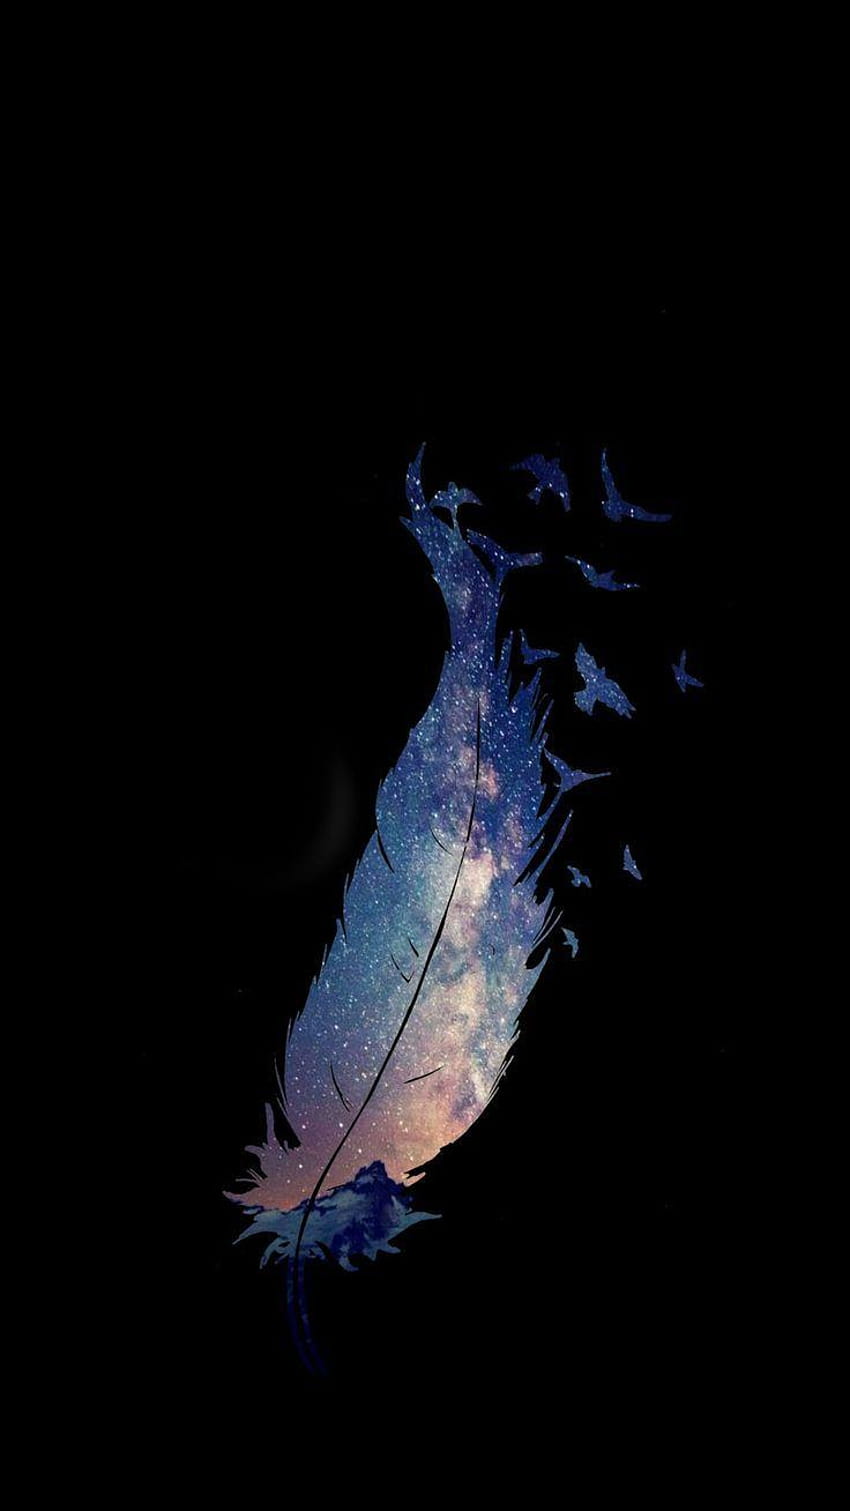 Feather wallpaper  girly iPhone wallpapers  iPhone lock screen wallpaper   Dark iphone backgrounds Iphone homescreen wallpaper Best iphone  wallpapers